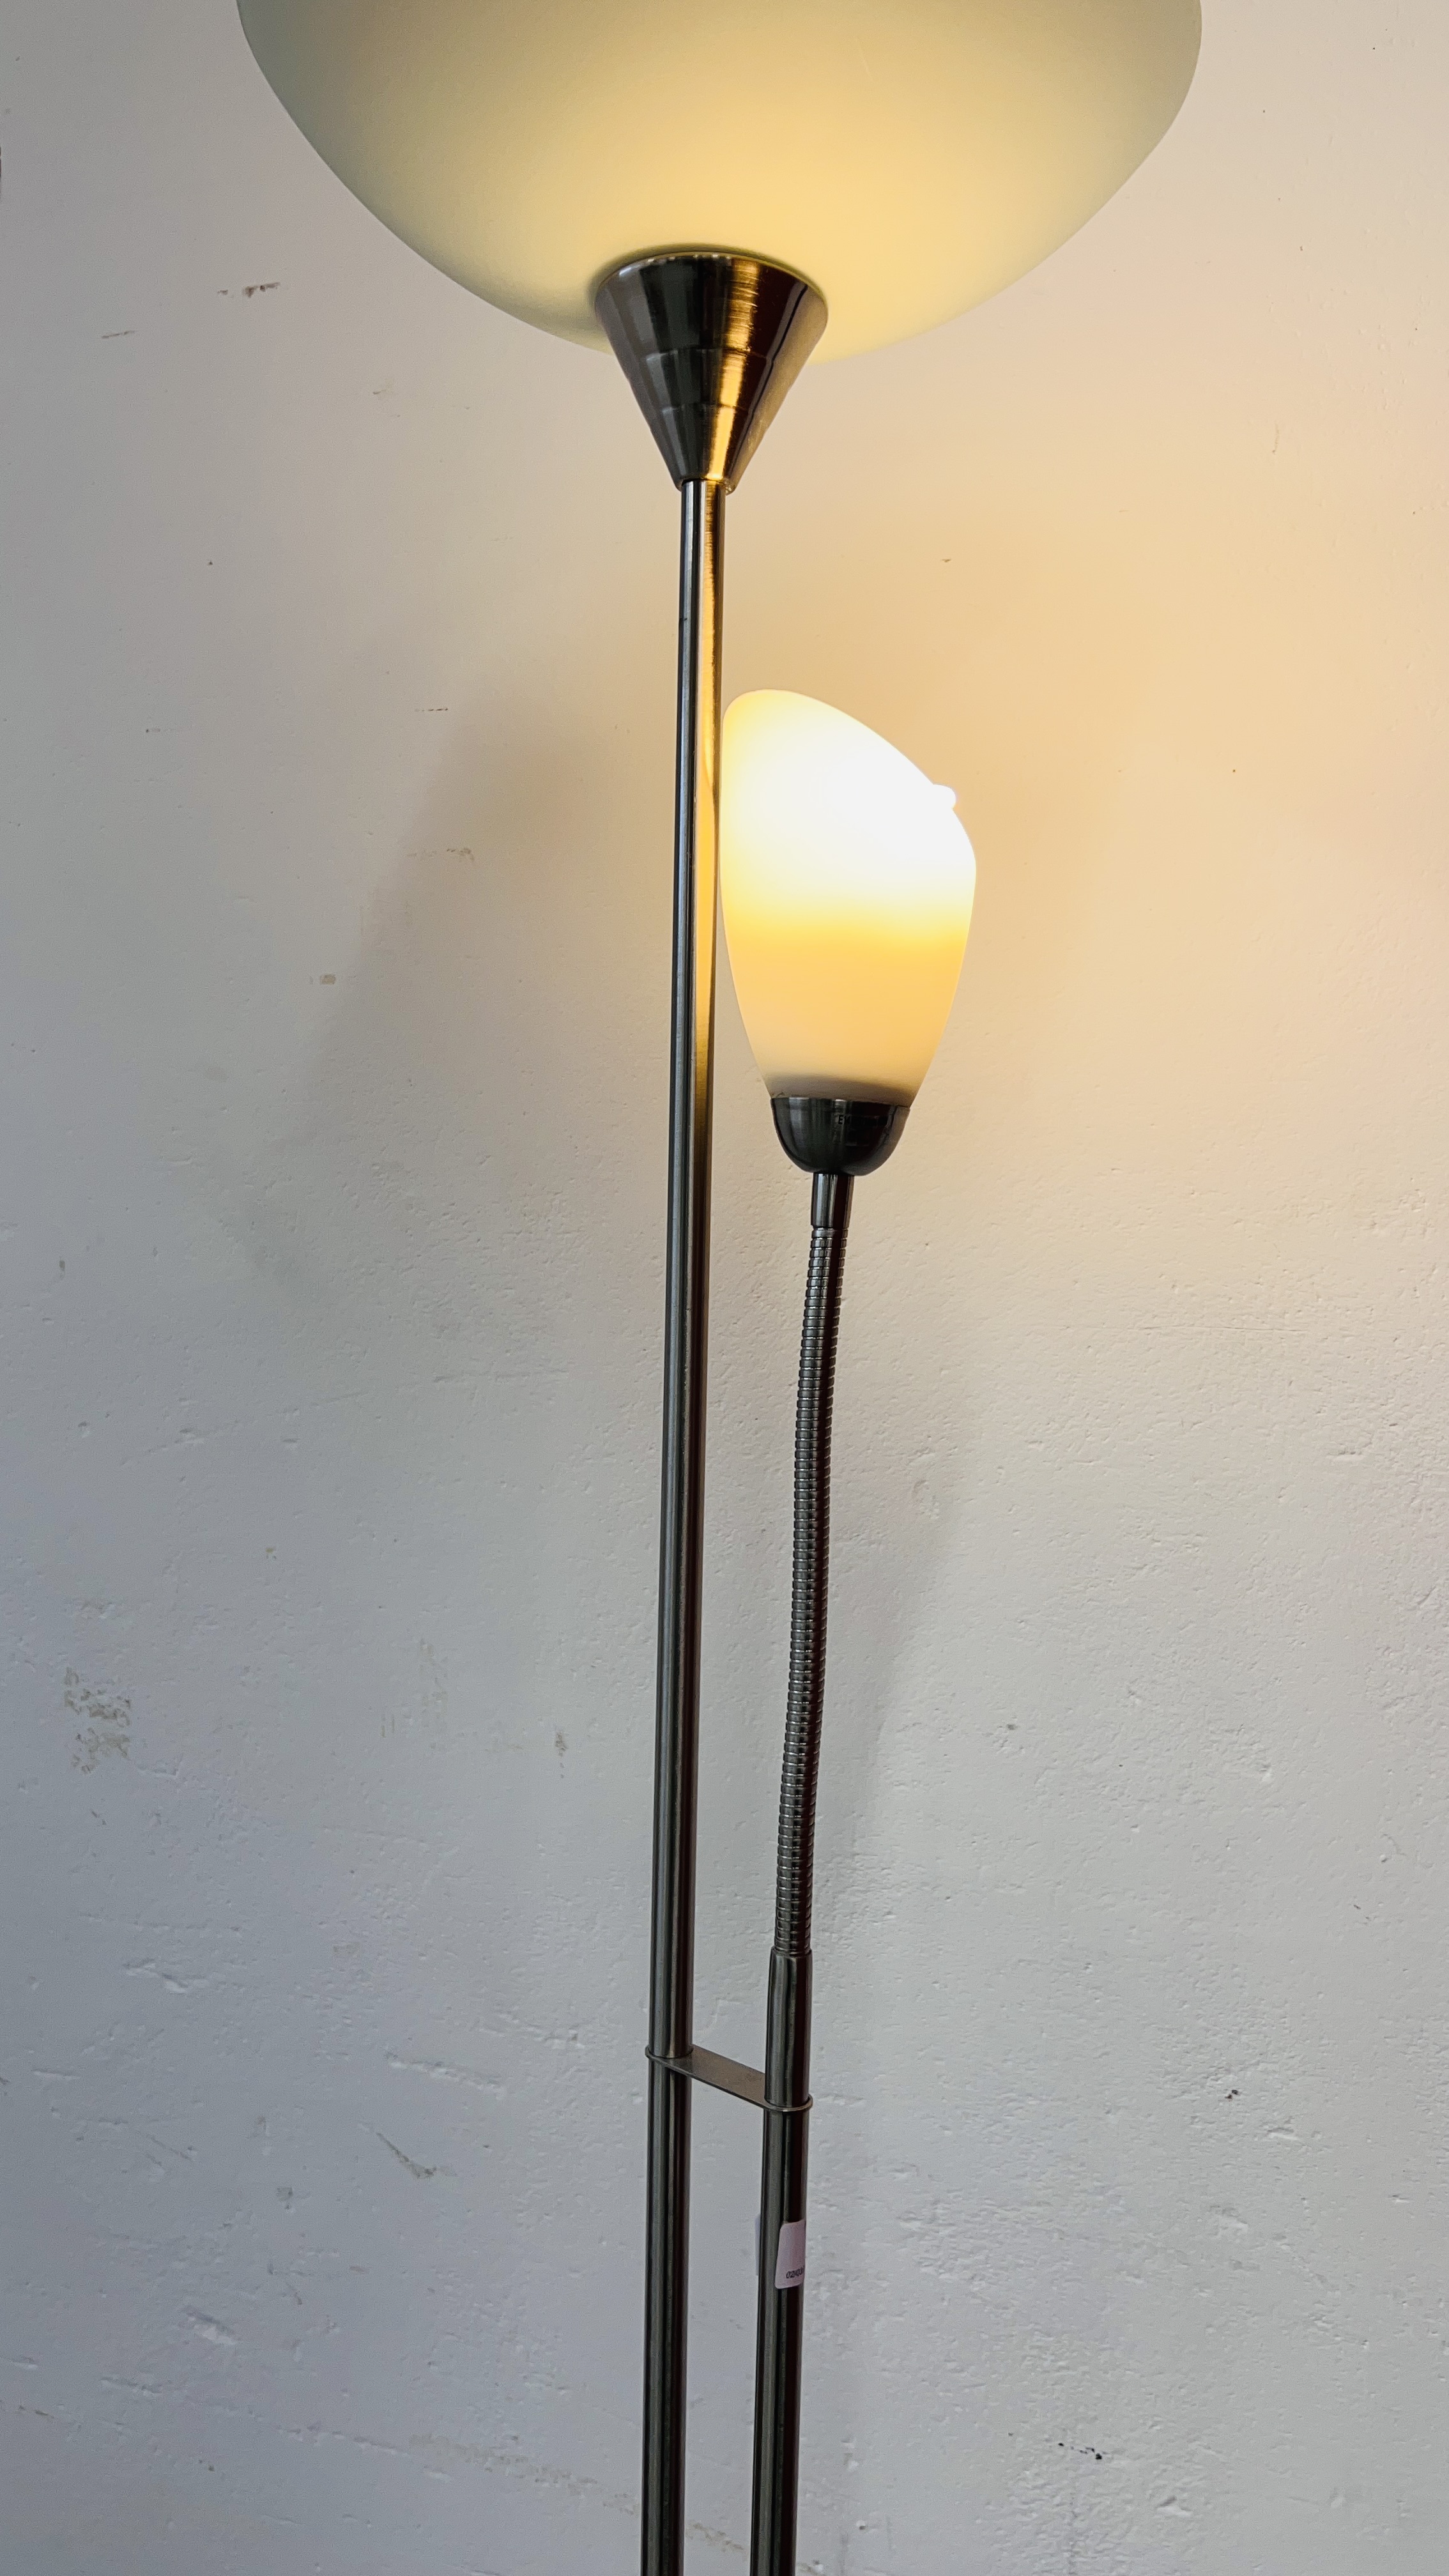 A MODERN BRUSHED STAINLESS STEEL FLOOR STANDING UPLIGHTER WITH READING LAMP - SOLD AS SEEN. - Image 2 of 6